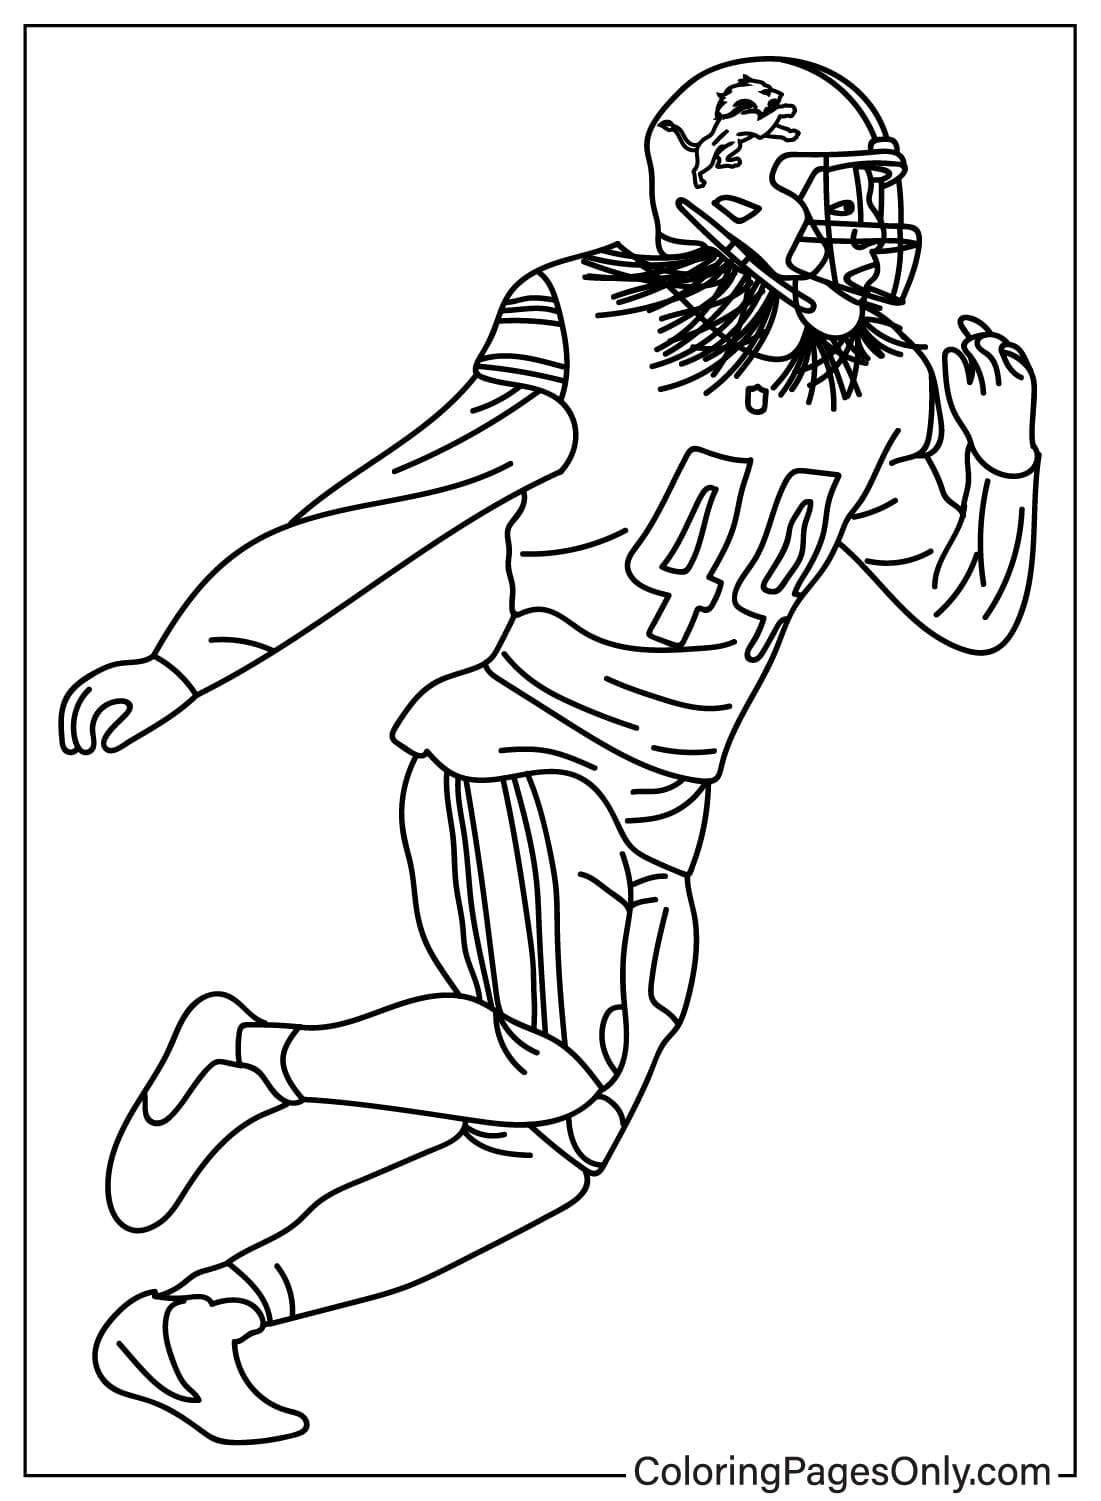 Jalen Reeves-Maybin Coloring Page from Detroit Lions